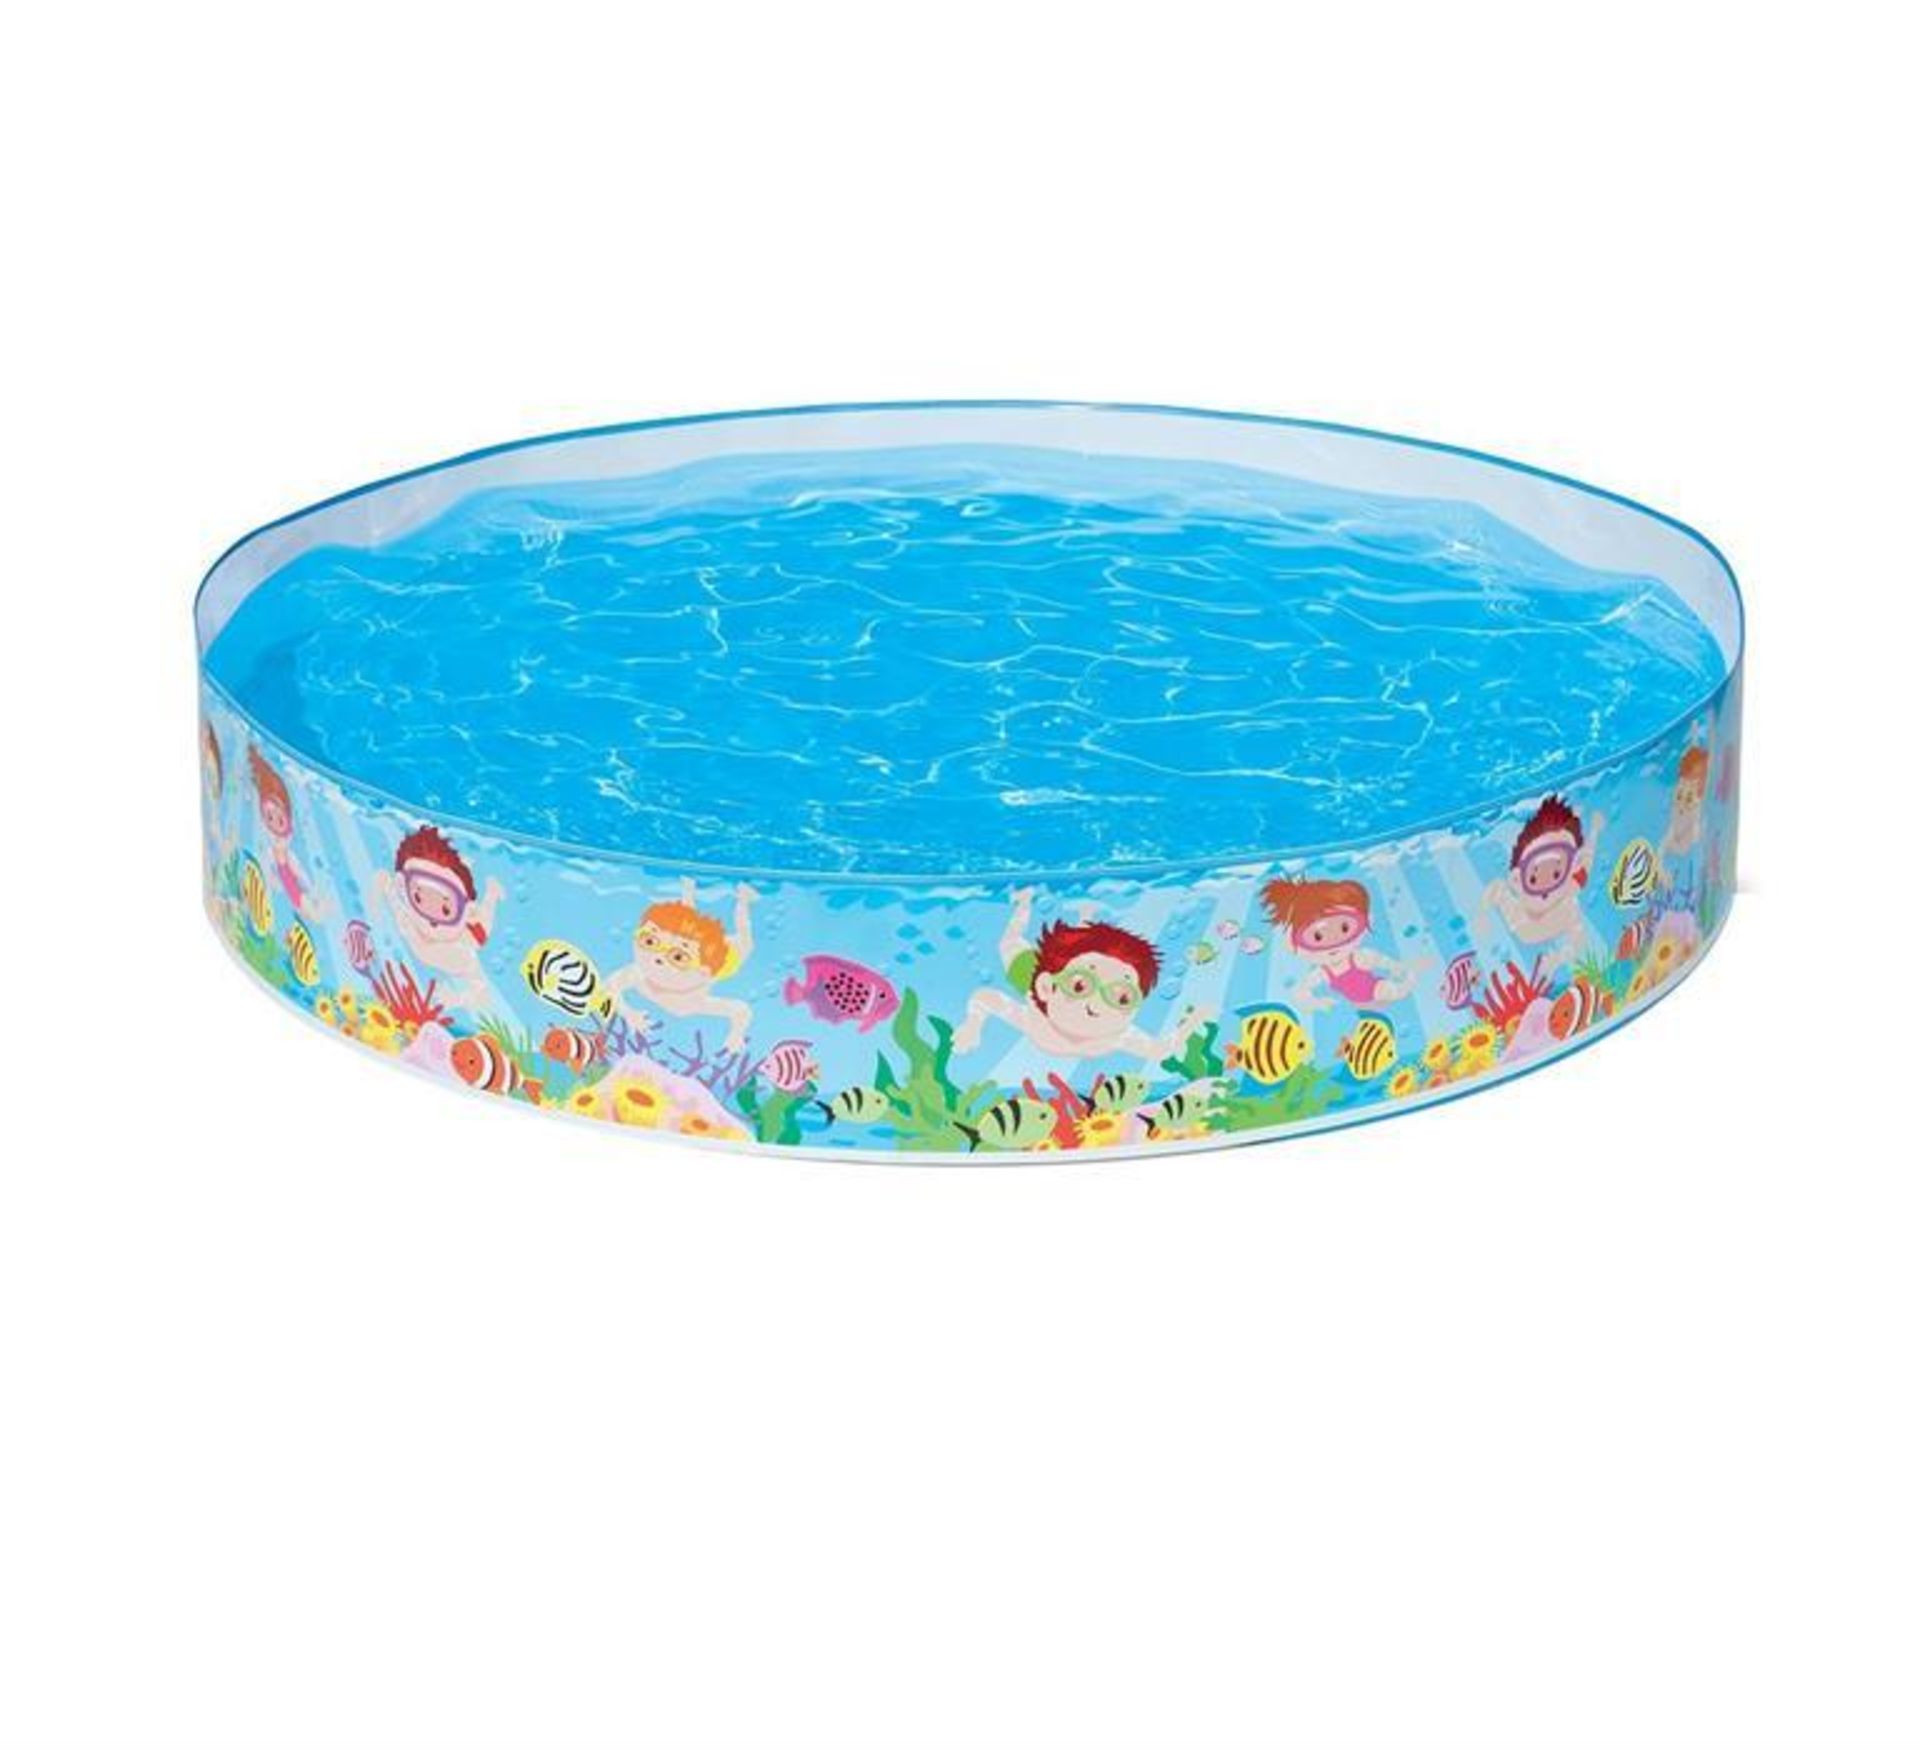 Approximately 162 x Intex Pool and Beach Setup Beach Print Various Styles Swimming Pools RRP £1290